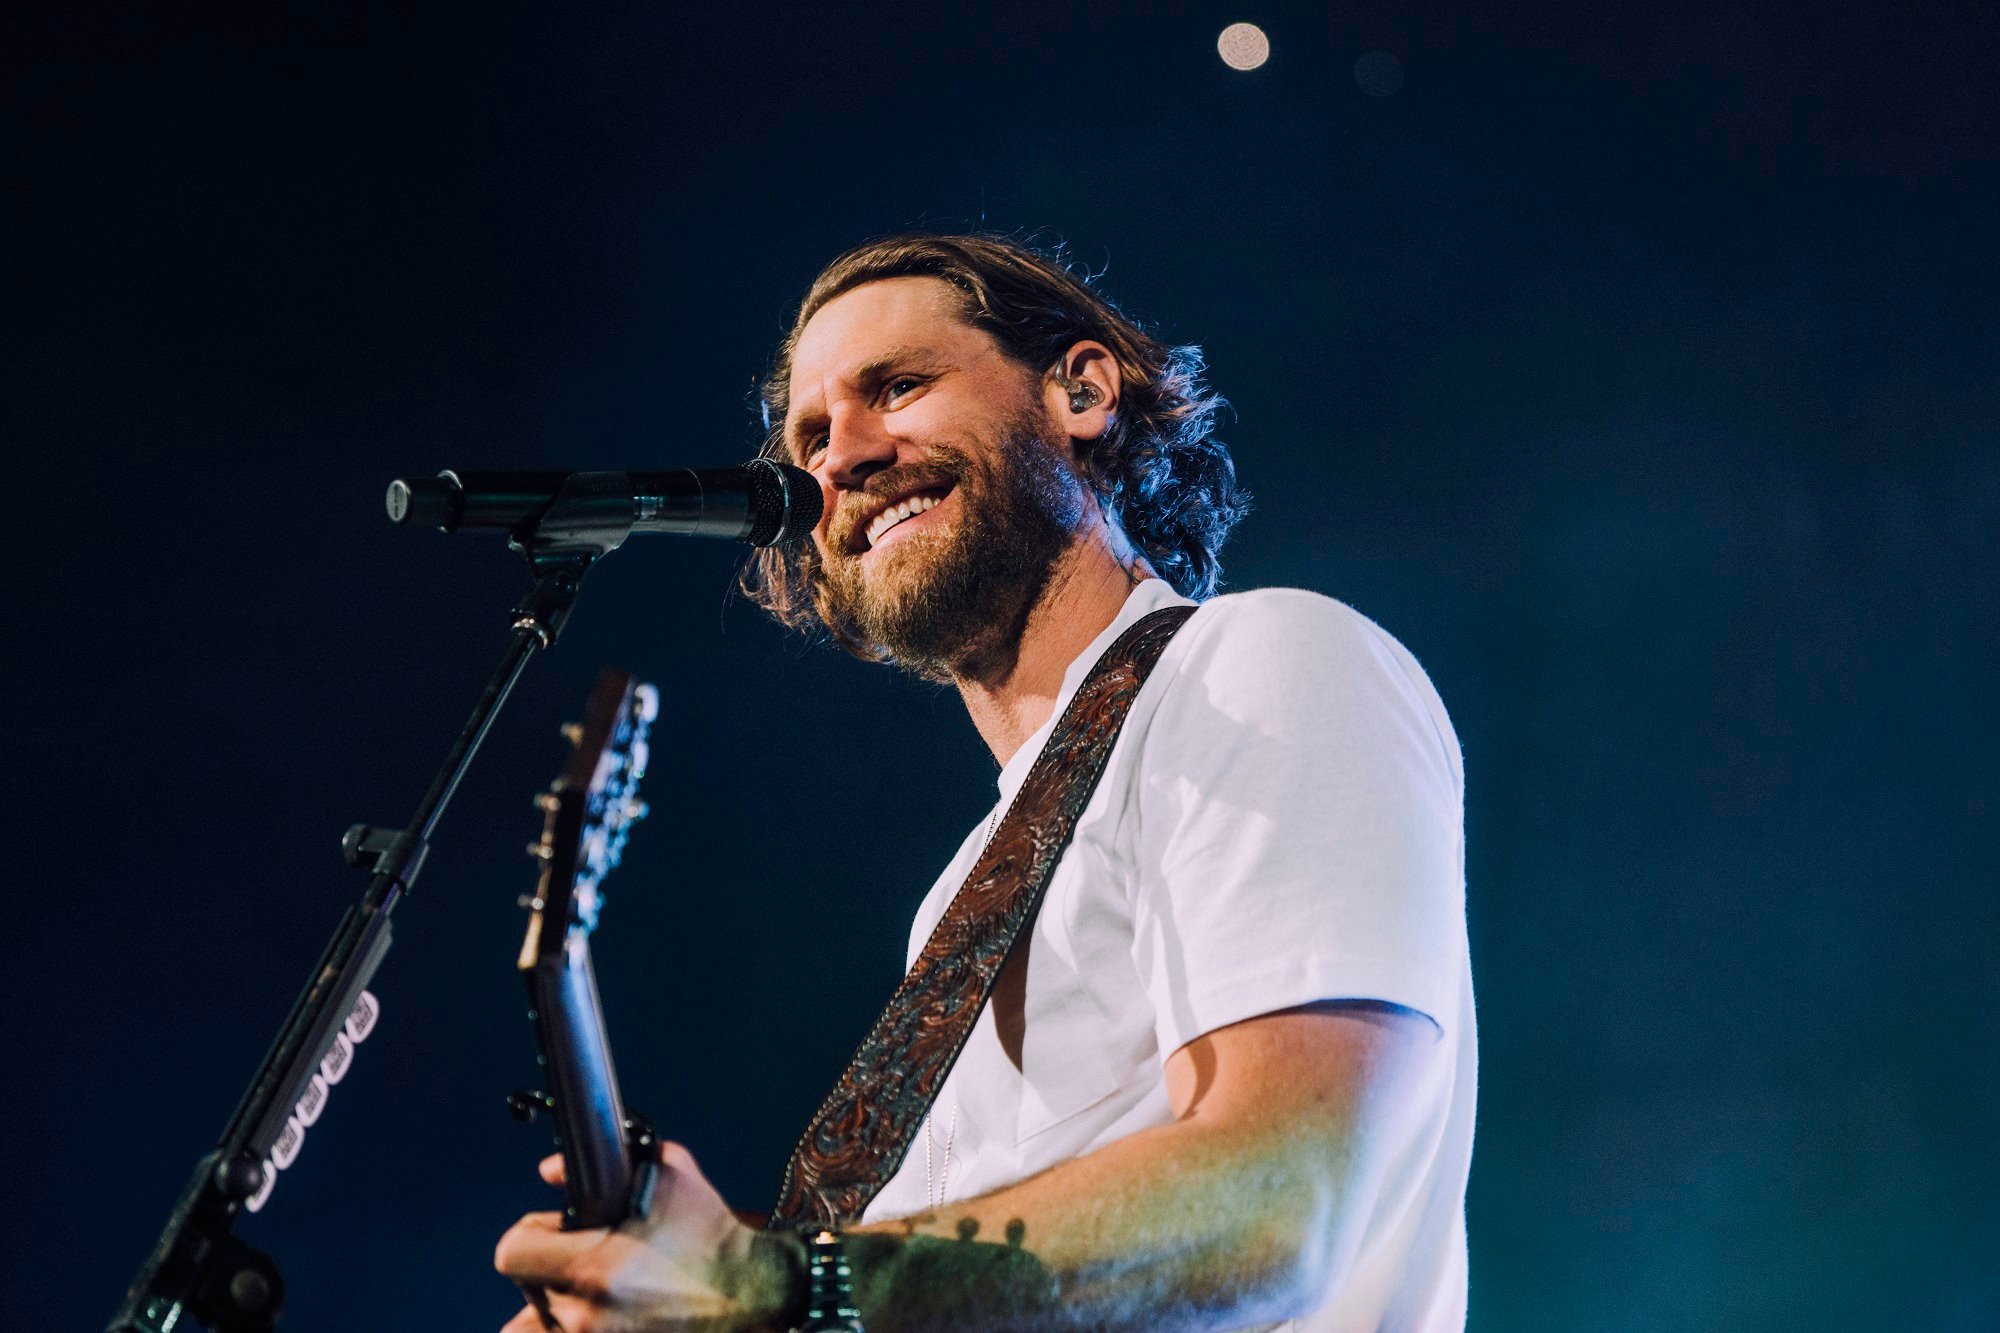 Country singer Chase Rice performs on stage